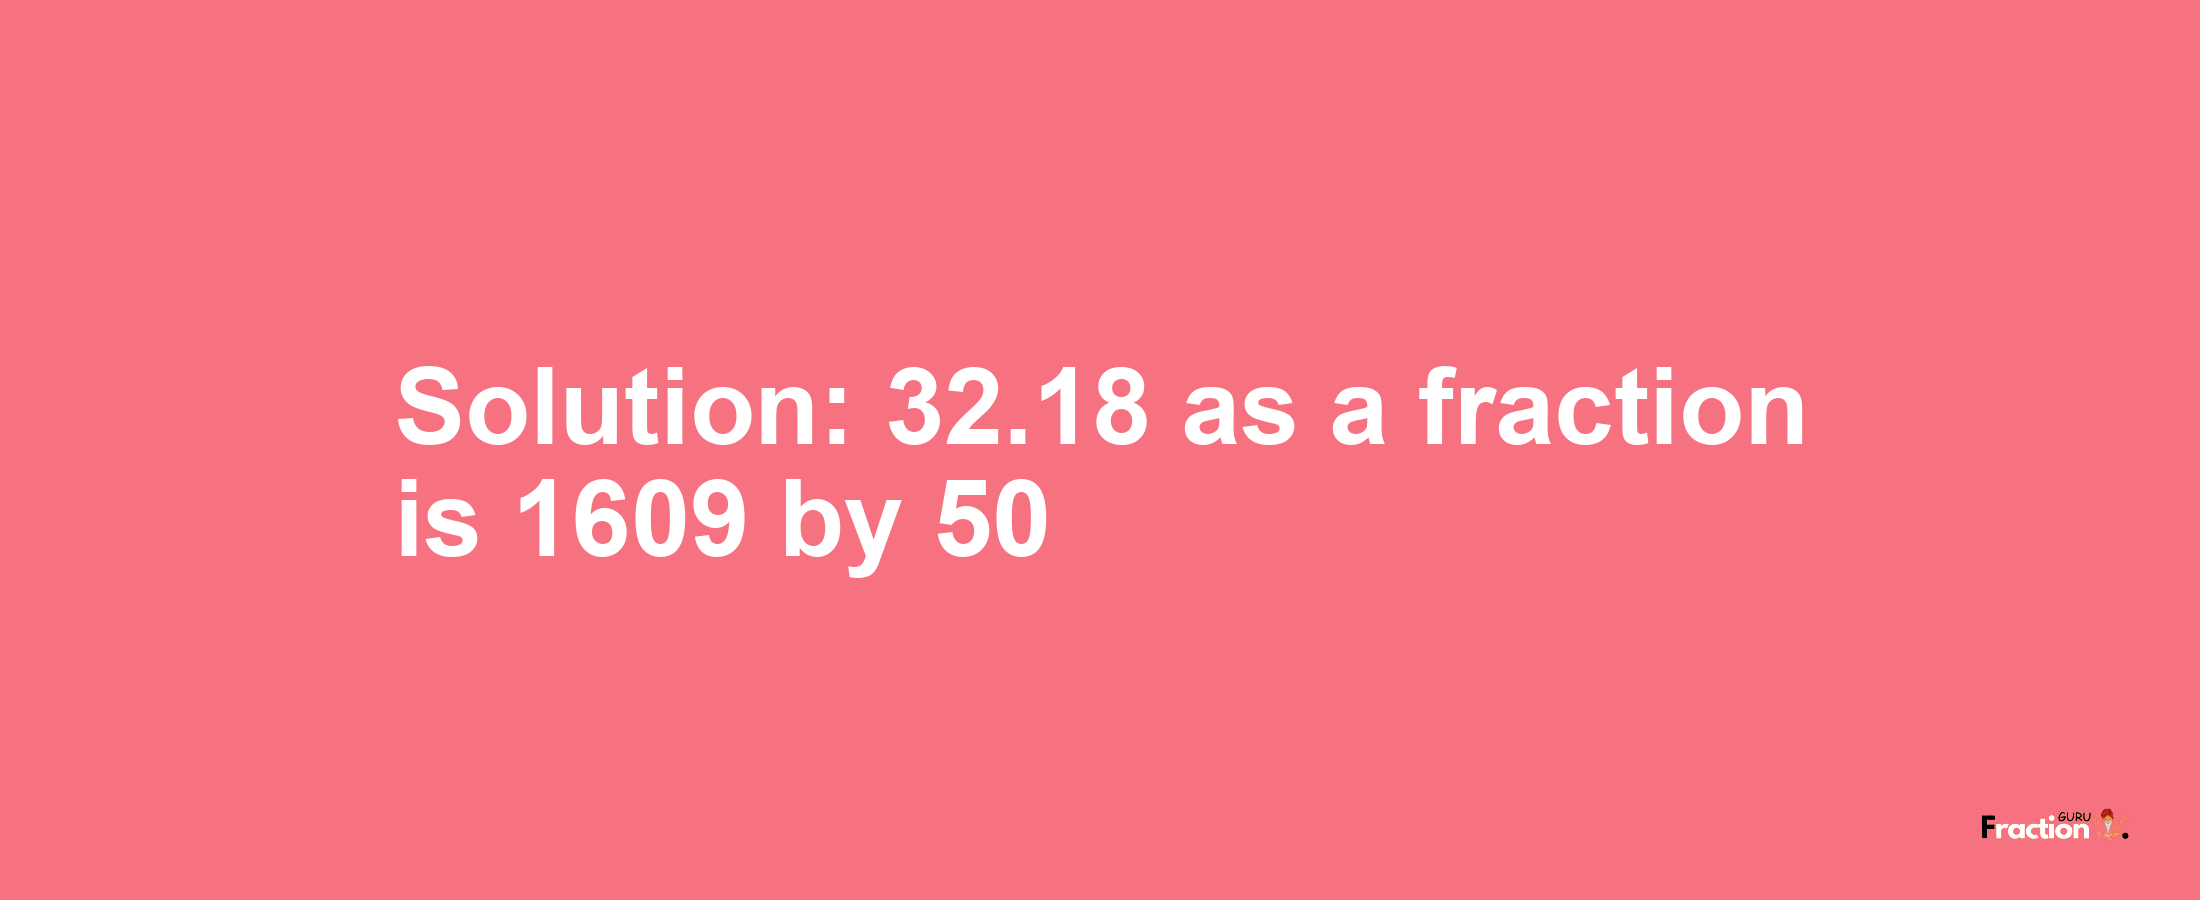 Solution:32.18 as a fraction is 1609/50